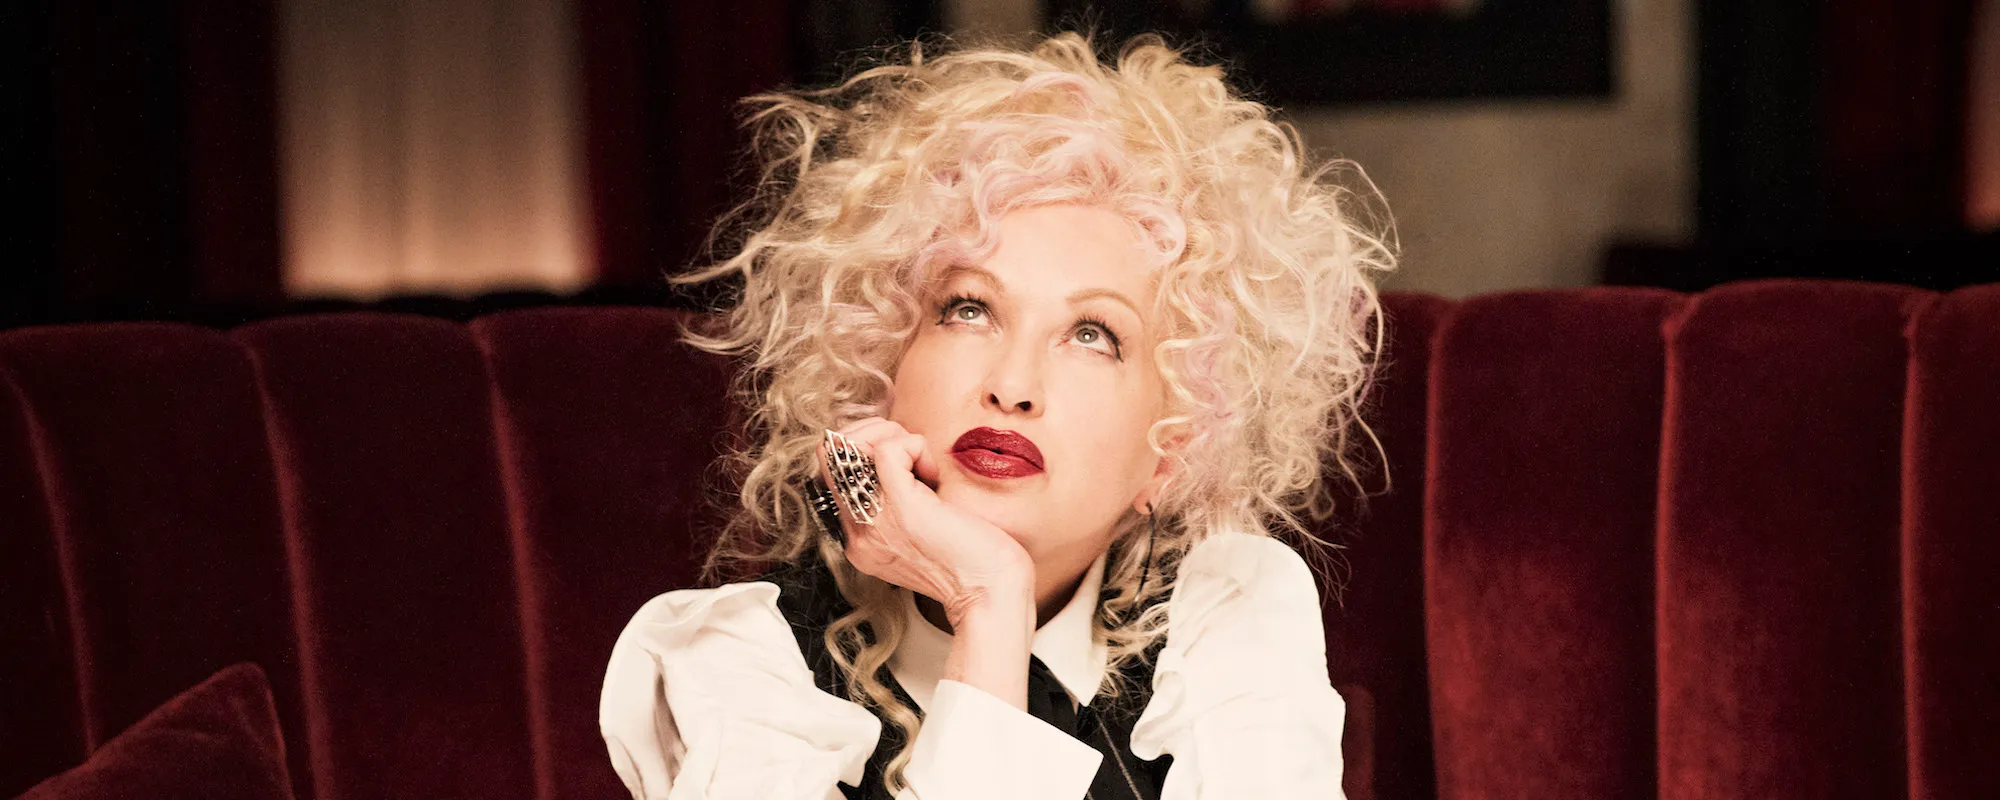 7 Songs You Didn’t Know Featured Cyndi Lauper